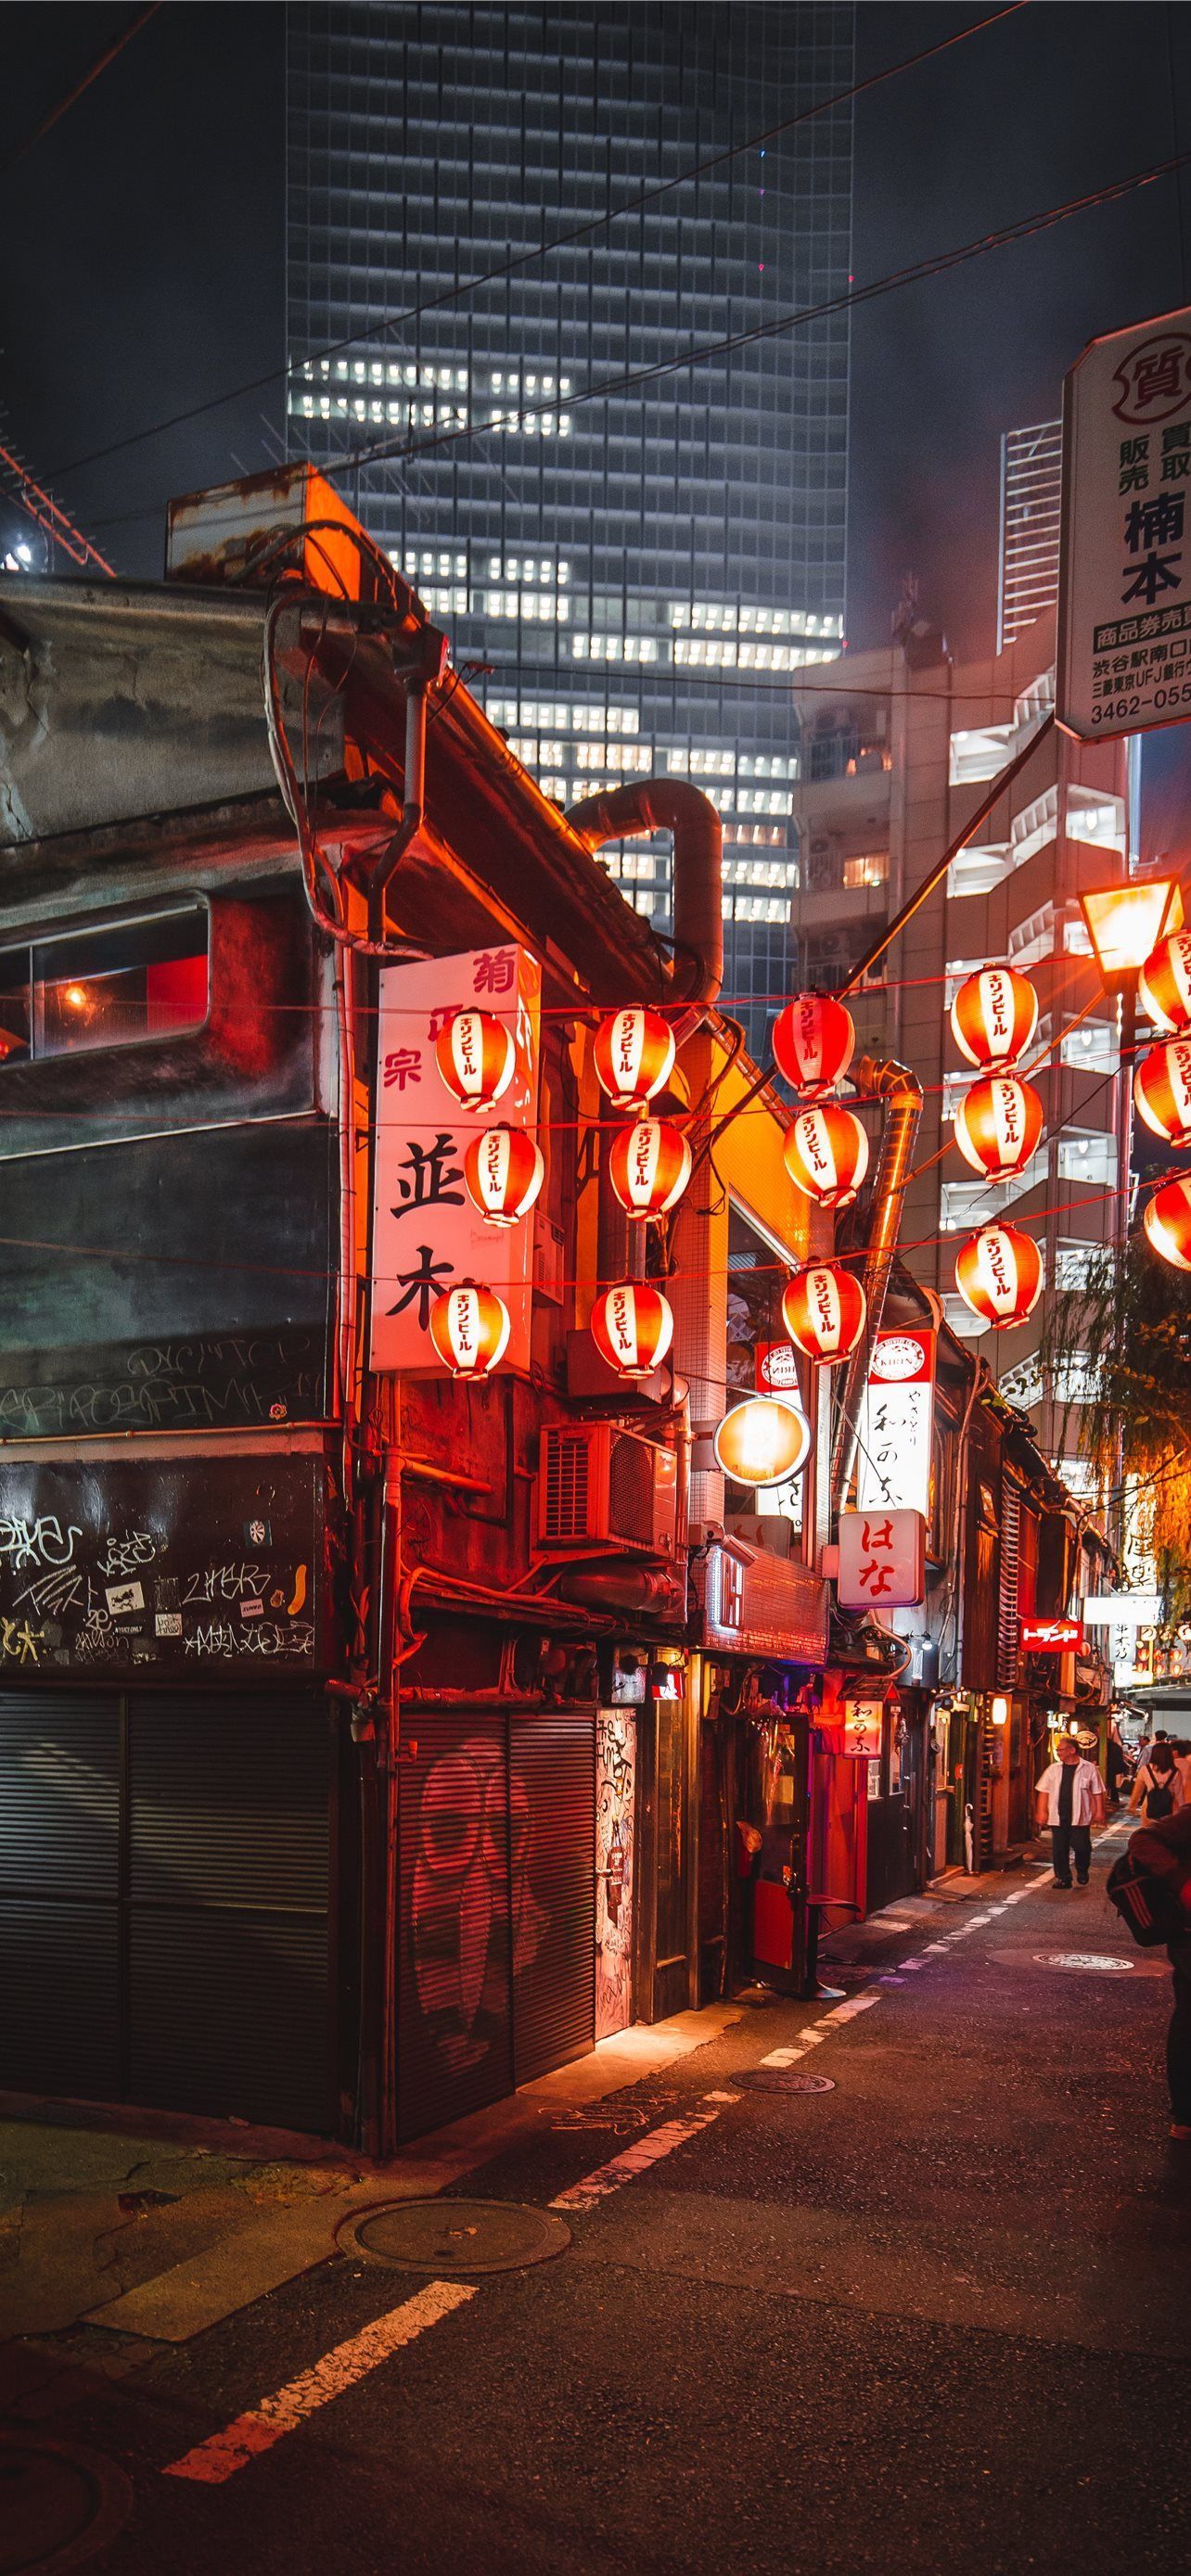 A street in Tokyo at night with red lanterns - Tokyo